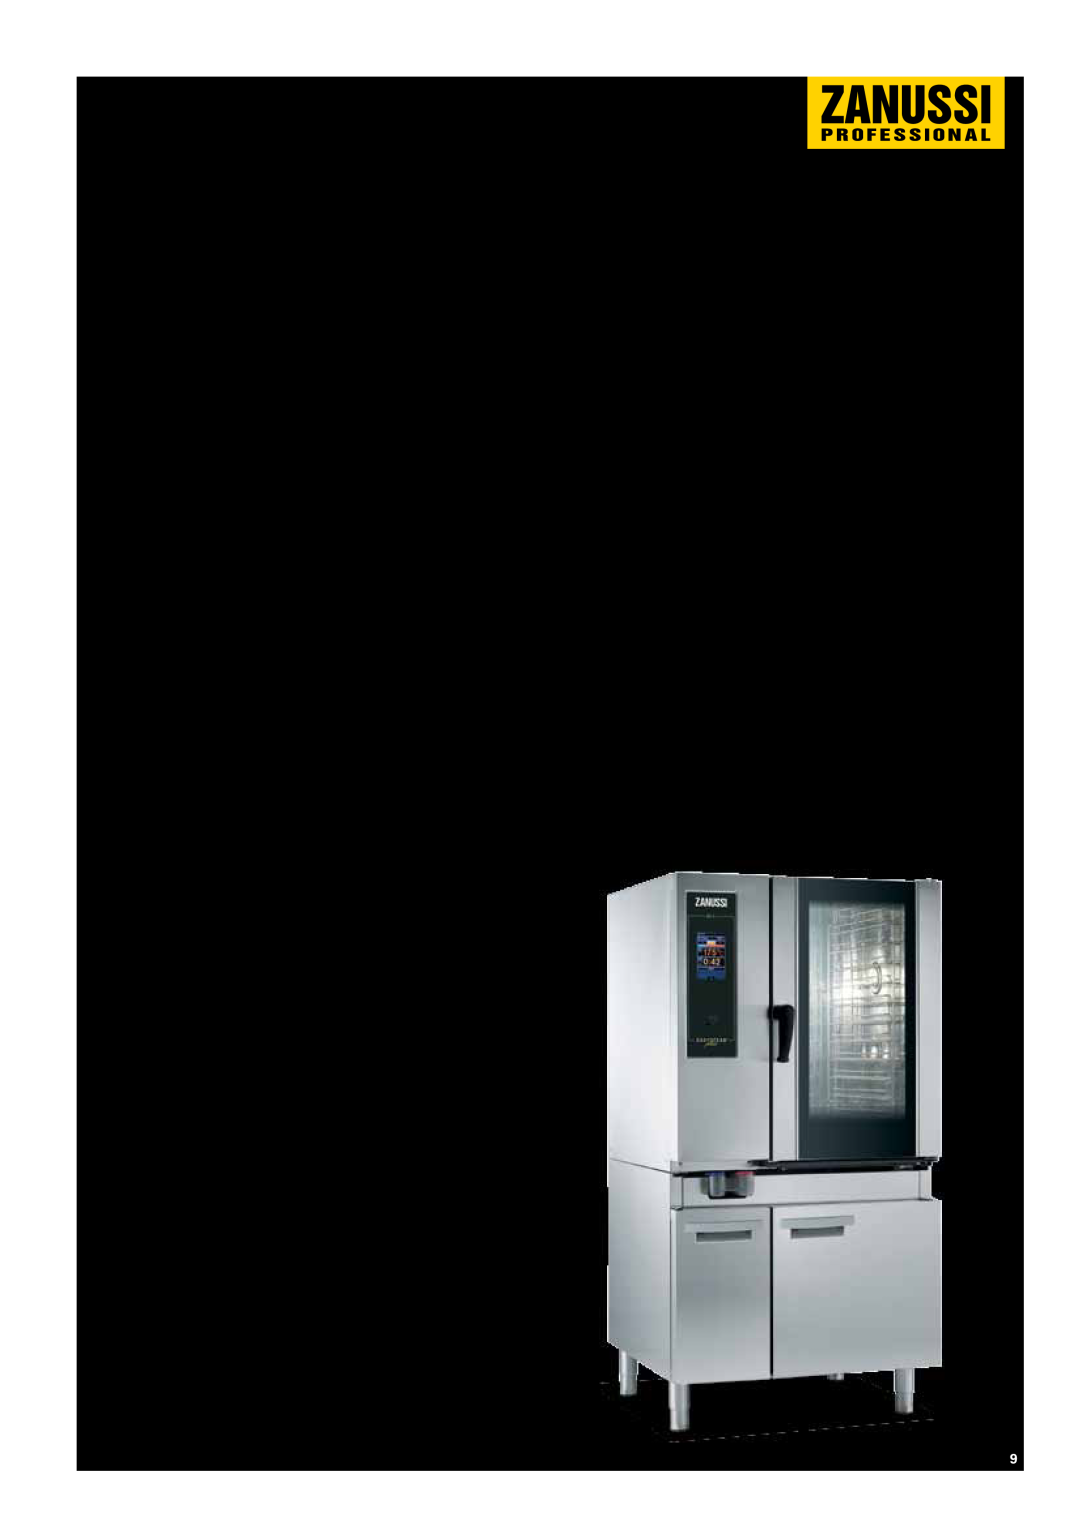 Zanussi Convection Oven manual EasySteamPlus ovens, Range Overview 